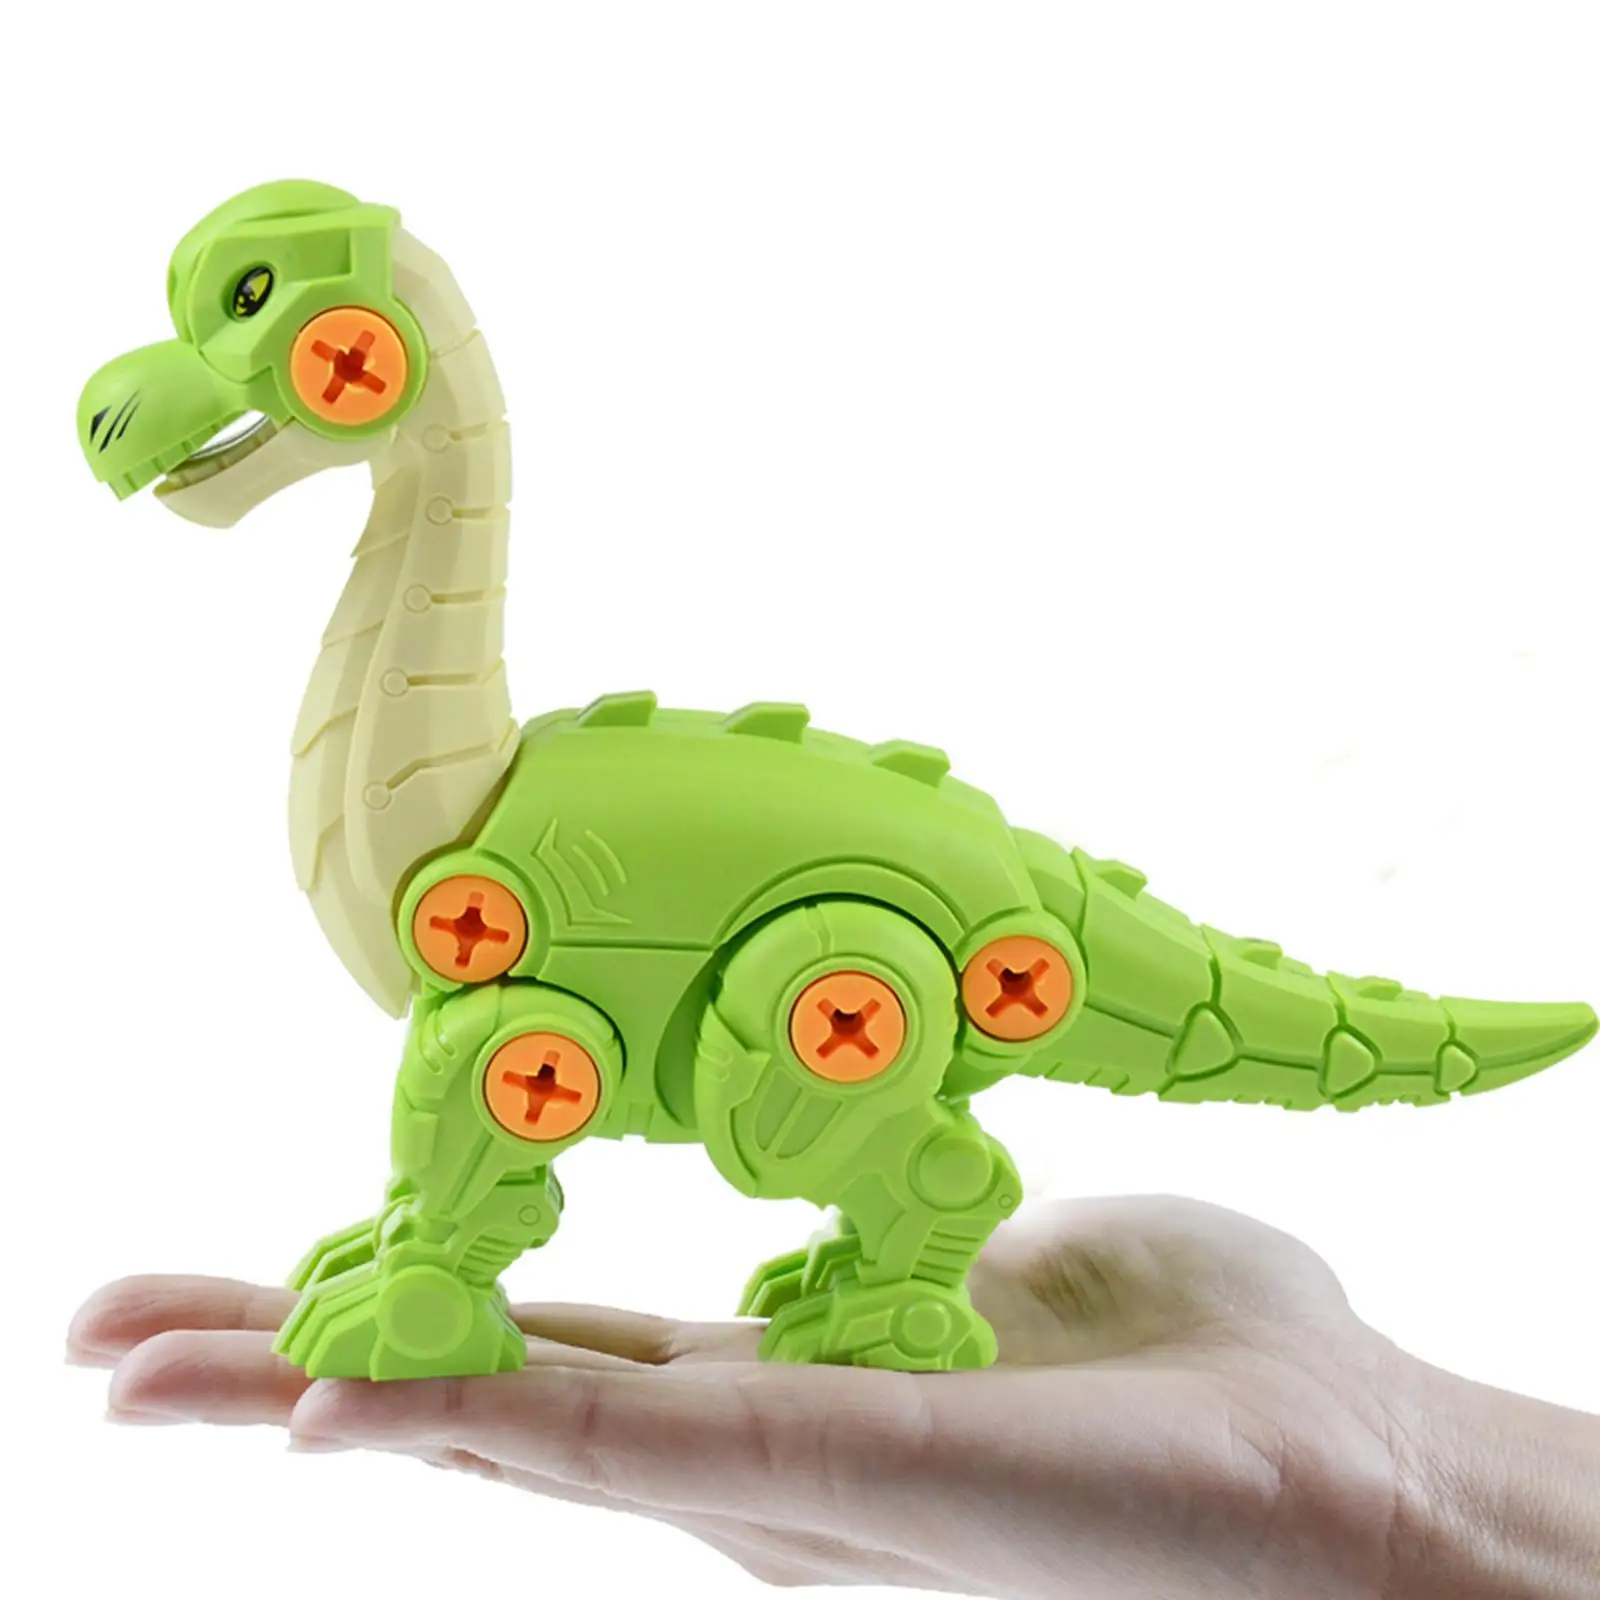 4 Pieces Dinosaur Toys Kit with Flexible Joints Building Toy Birthday Gifts for Kids Toddlers